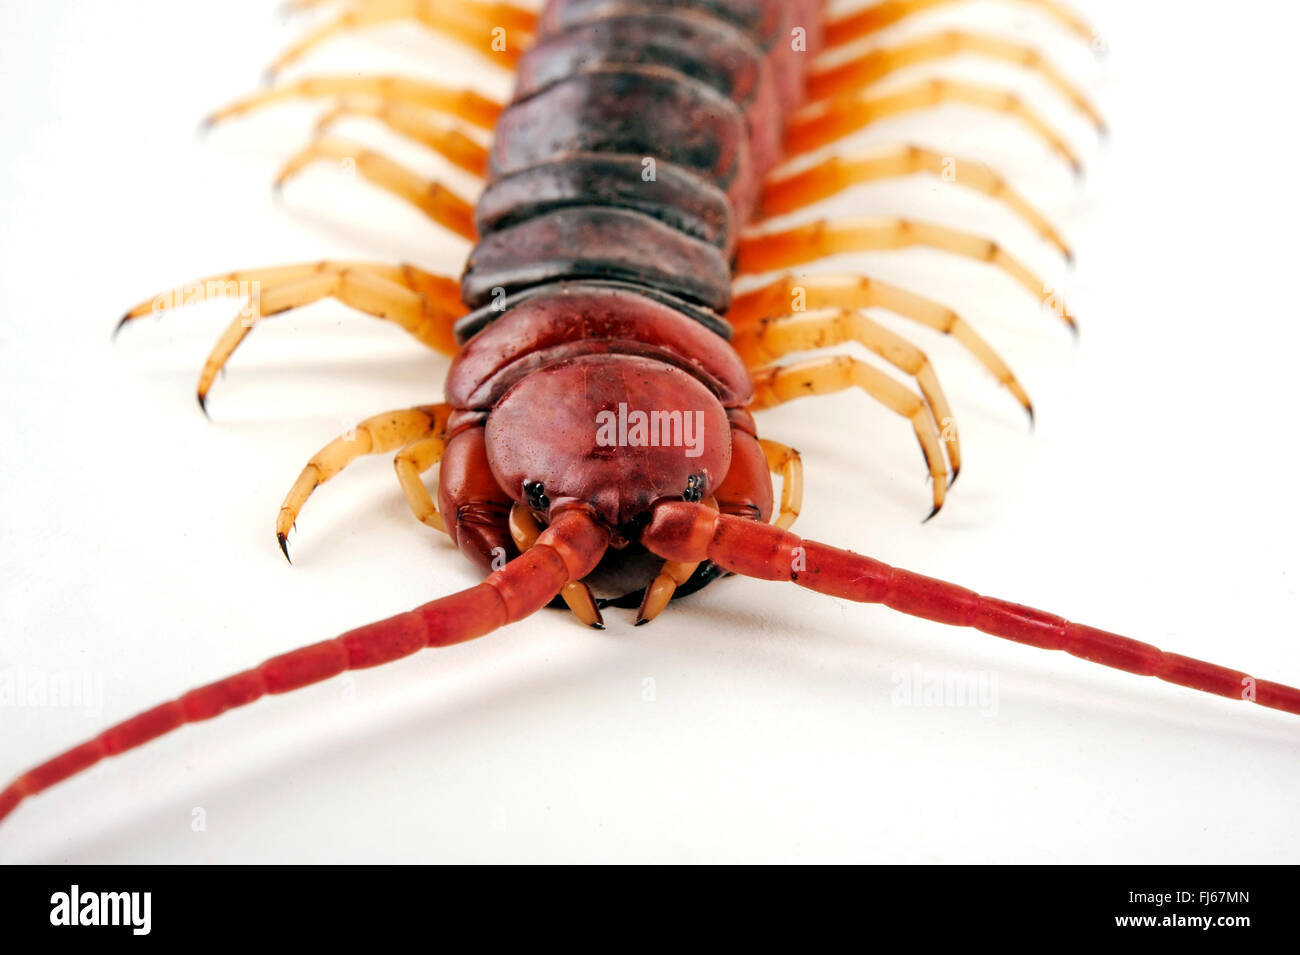 Darwin's Goliath Centipede (Scolopendra galapagoensis), head ans mouth parts of a poisonous scolopender Stock Photo